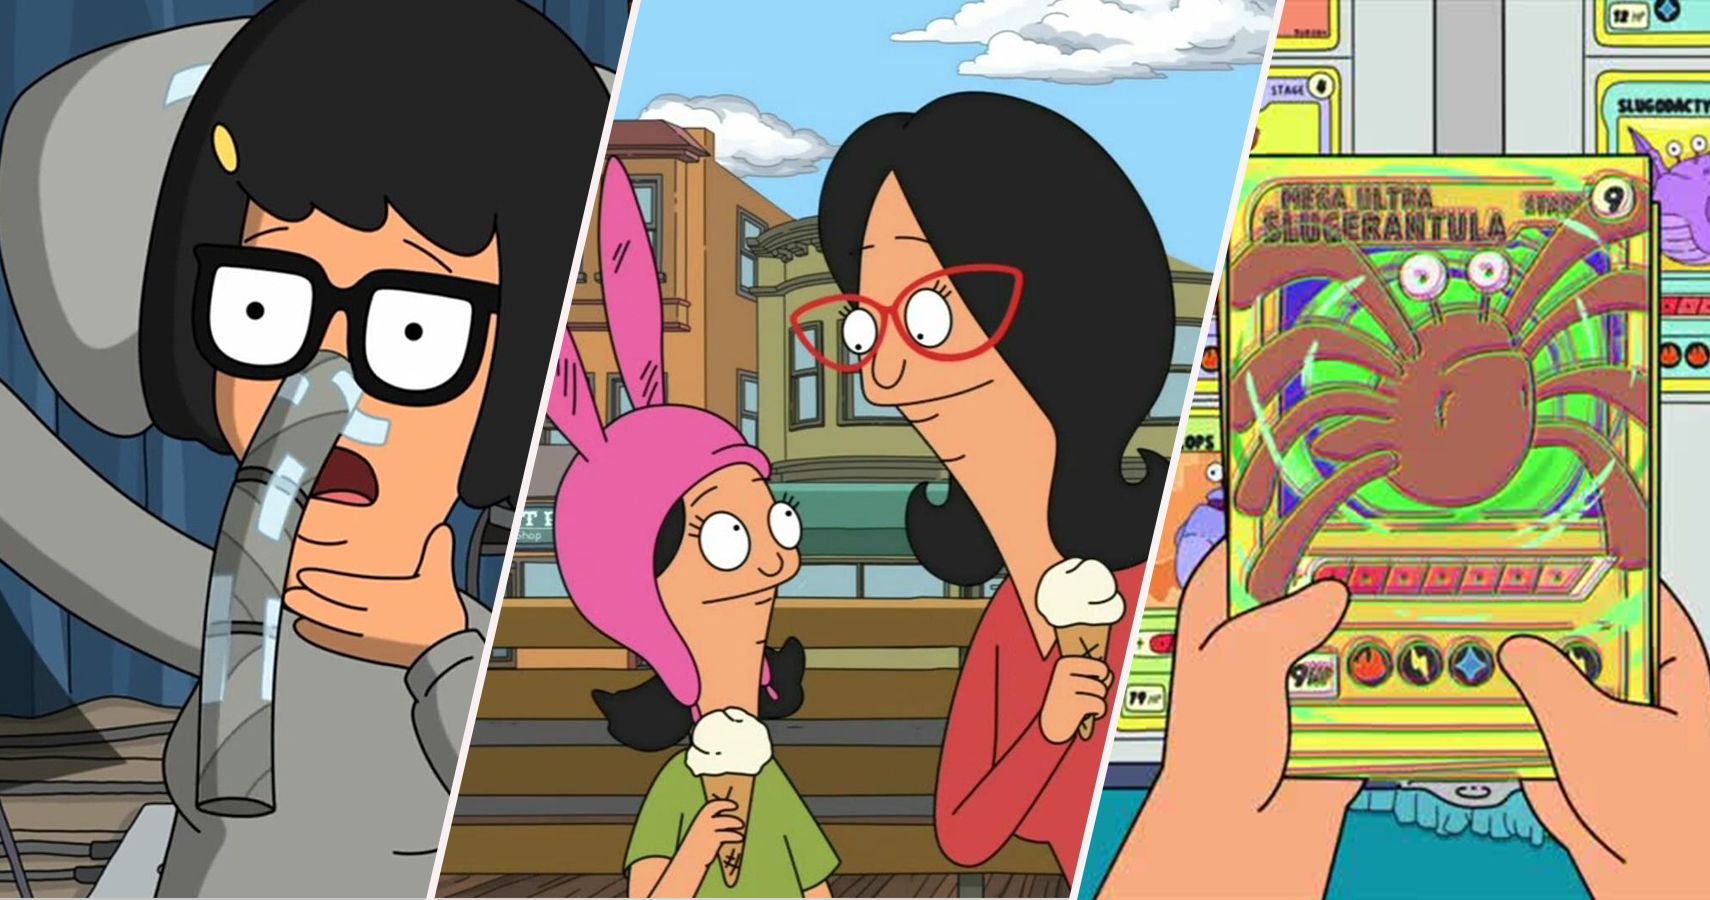 Bob’s Burgers: 5 Times We Felt Bad For Louise (& 5 Times She Got What She Deserved)